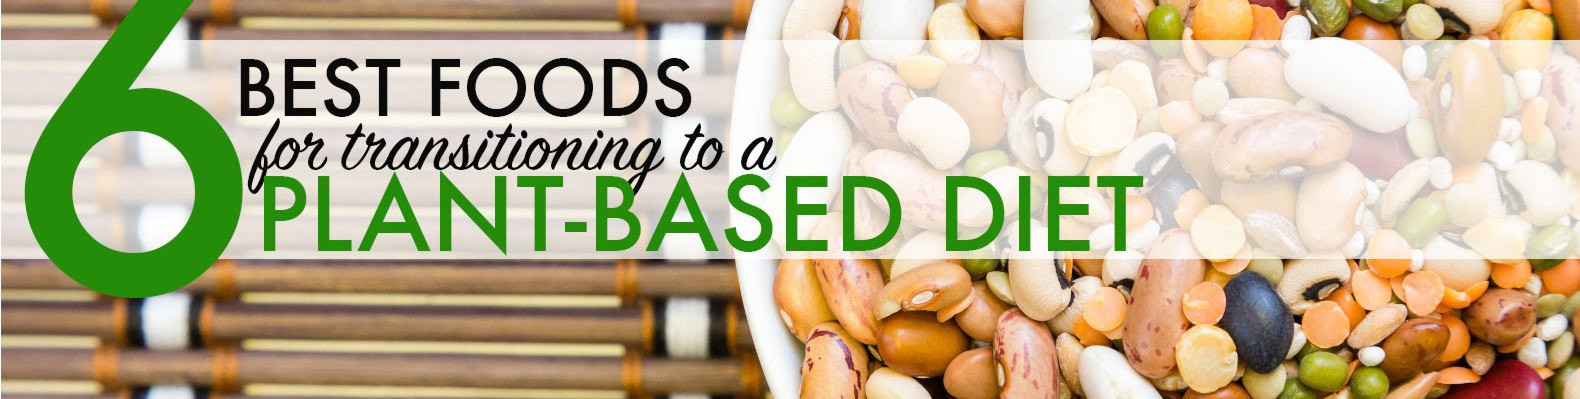 Transition To Plant Based Diet
 6 Best foods to help you transition to a plant based t